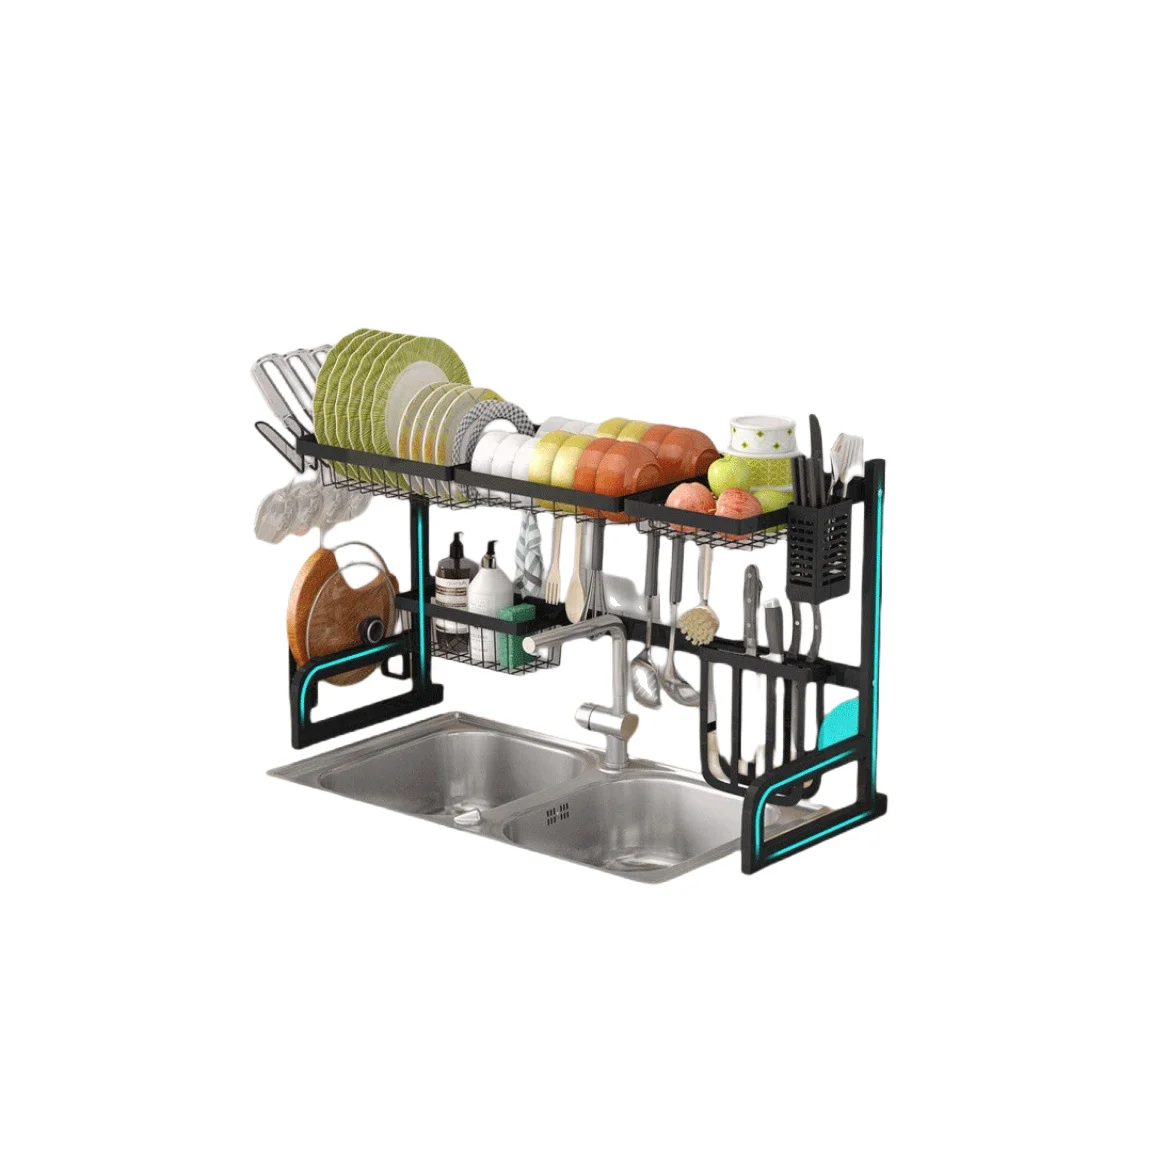 Large capacity black silvery kitchen drying tableware water filtering over the sink rack storage